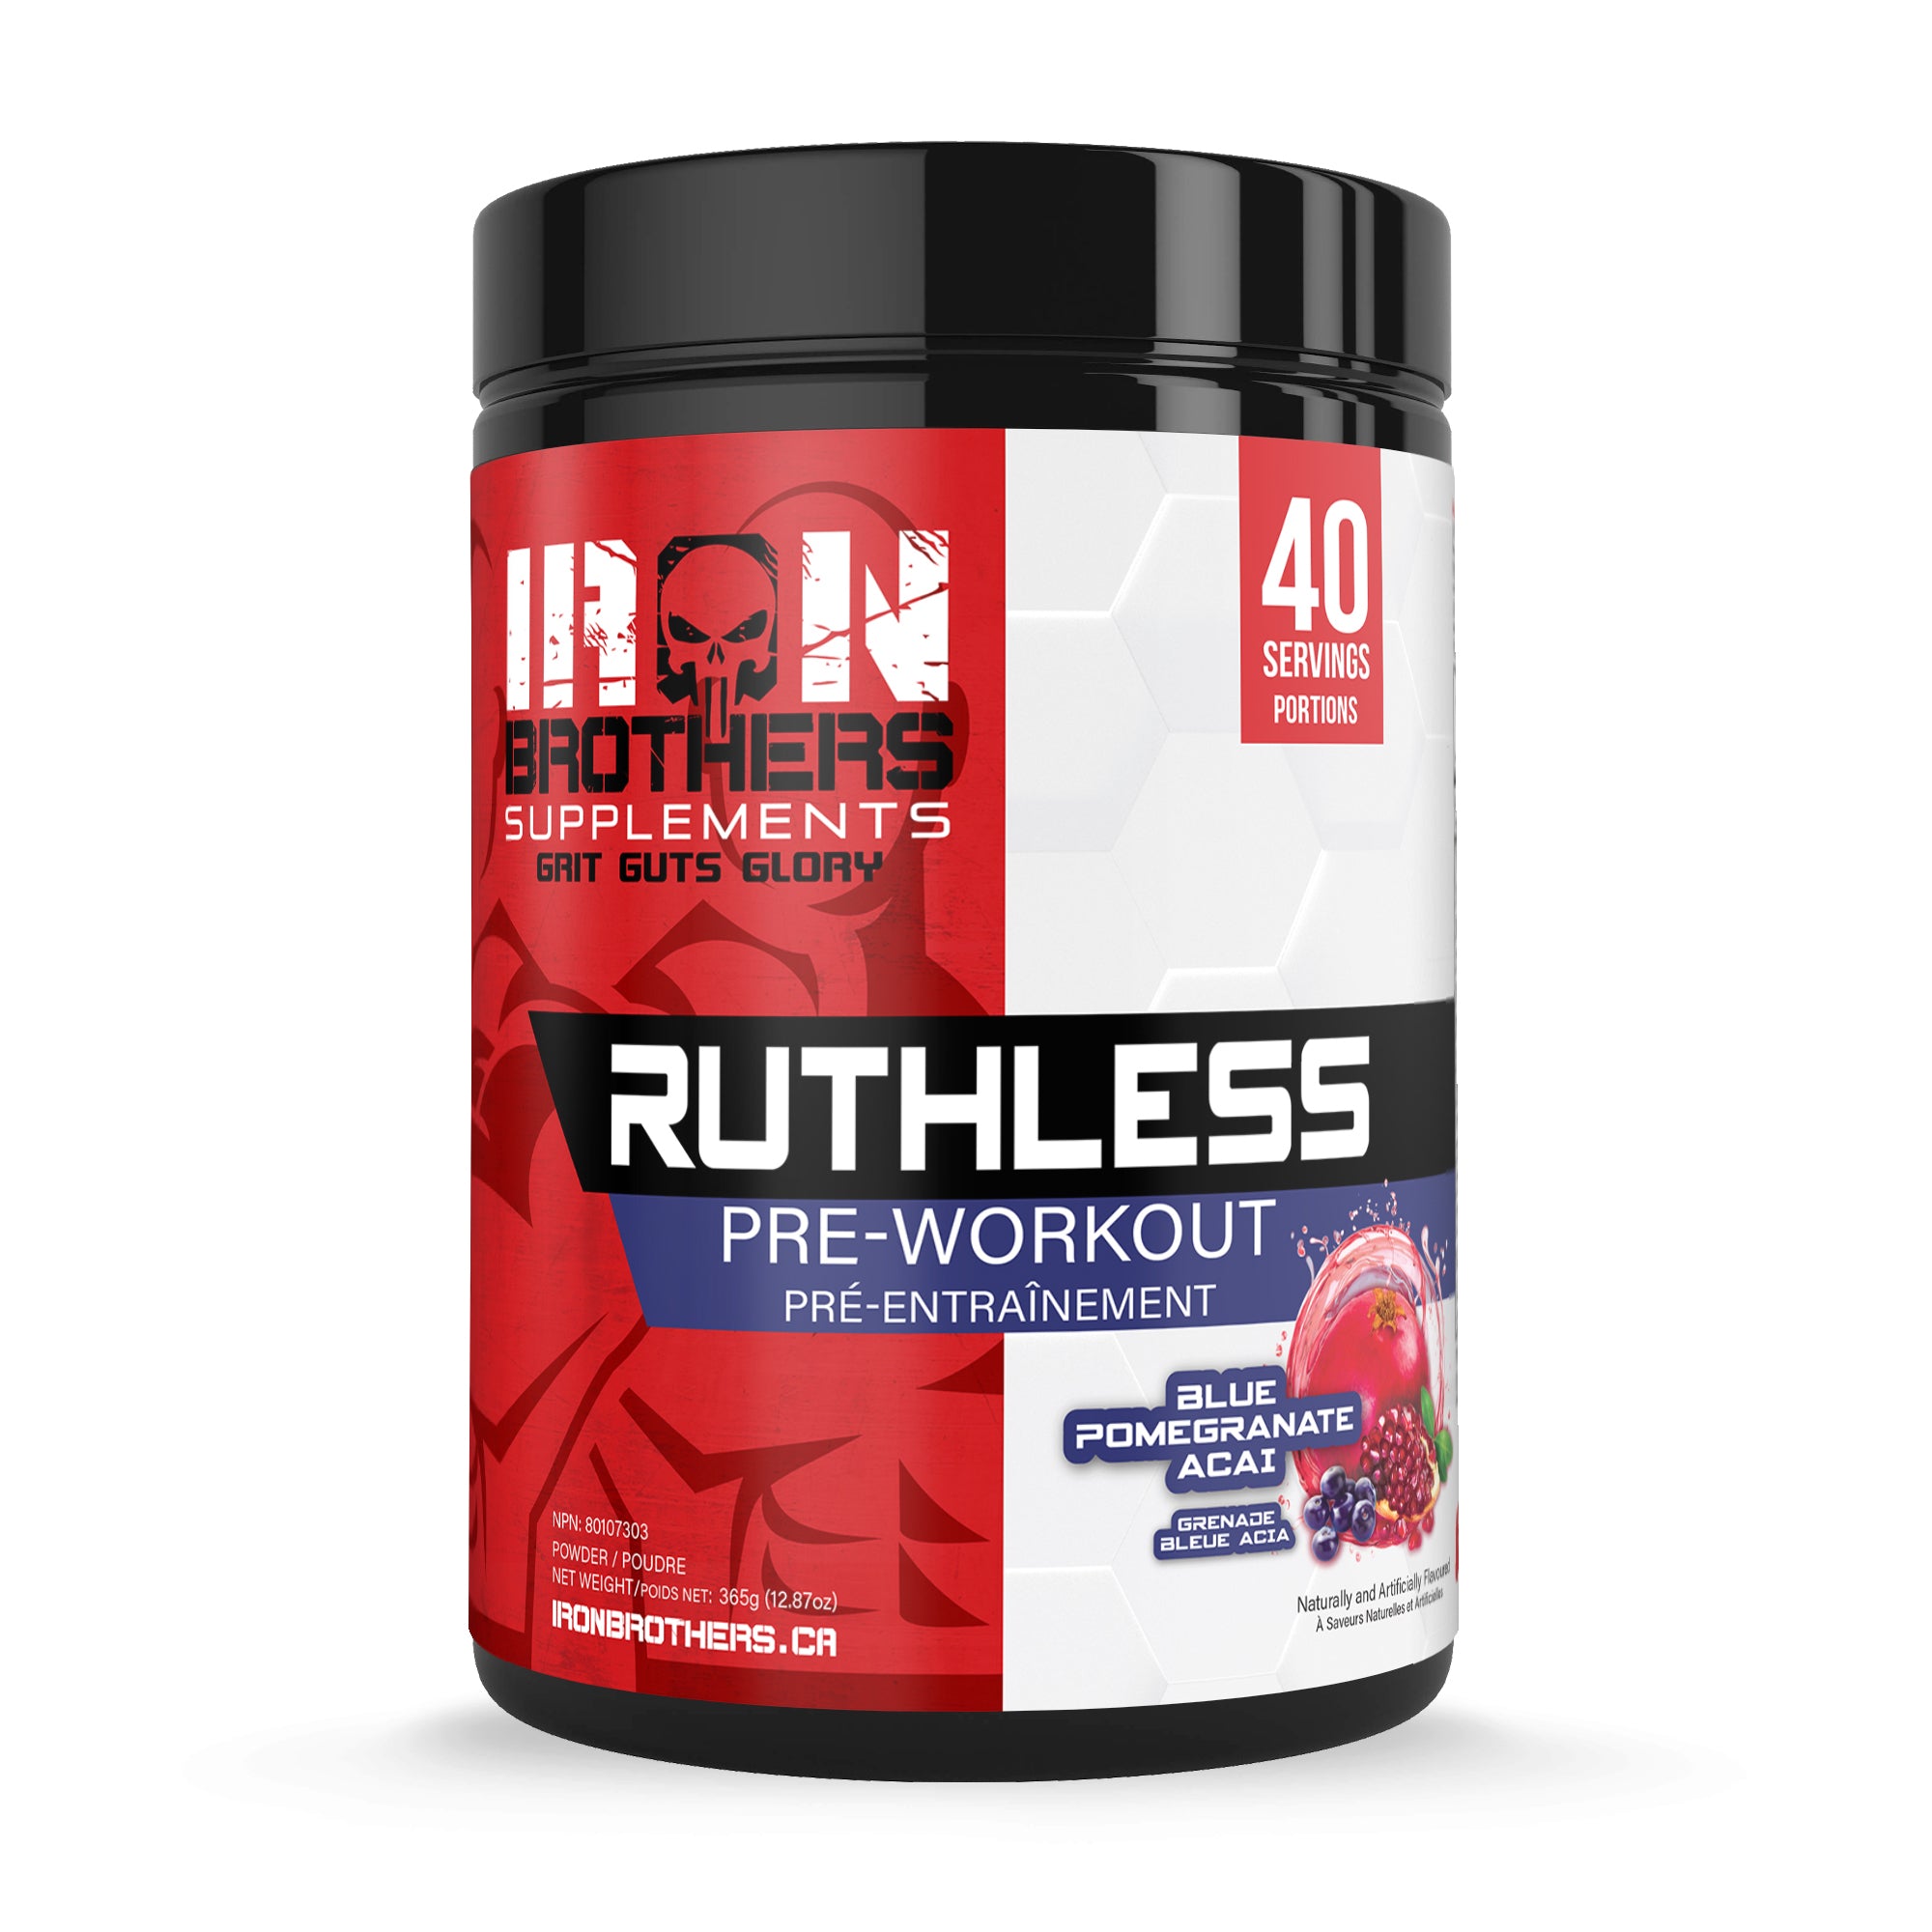 Ruthless Pre-Workout